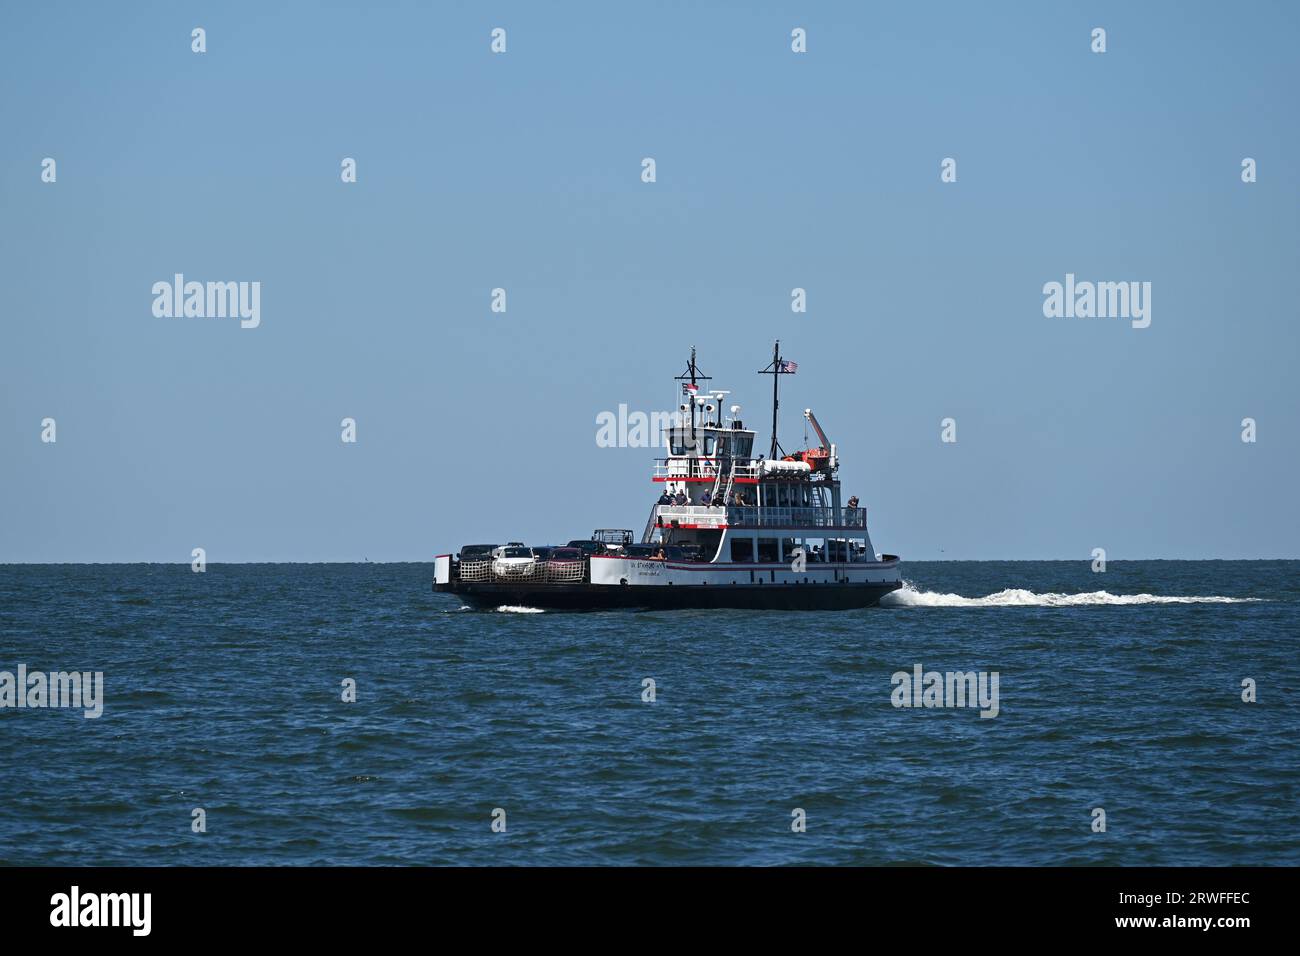 The car ferry W Stanford White crossing the Pamlico Sound between Hatteras Island and Ocracoke Island. Stock Photo